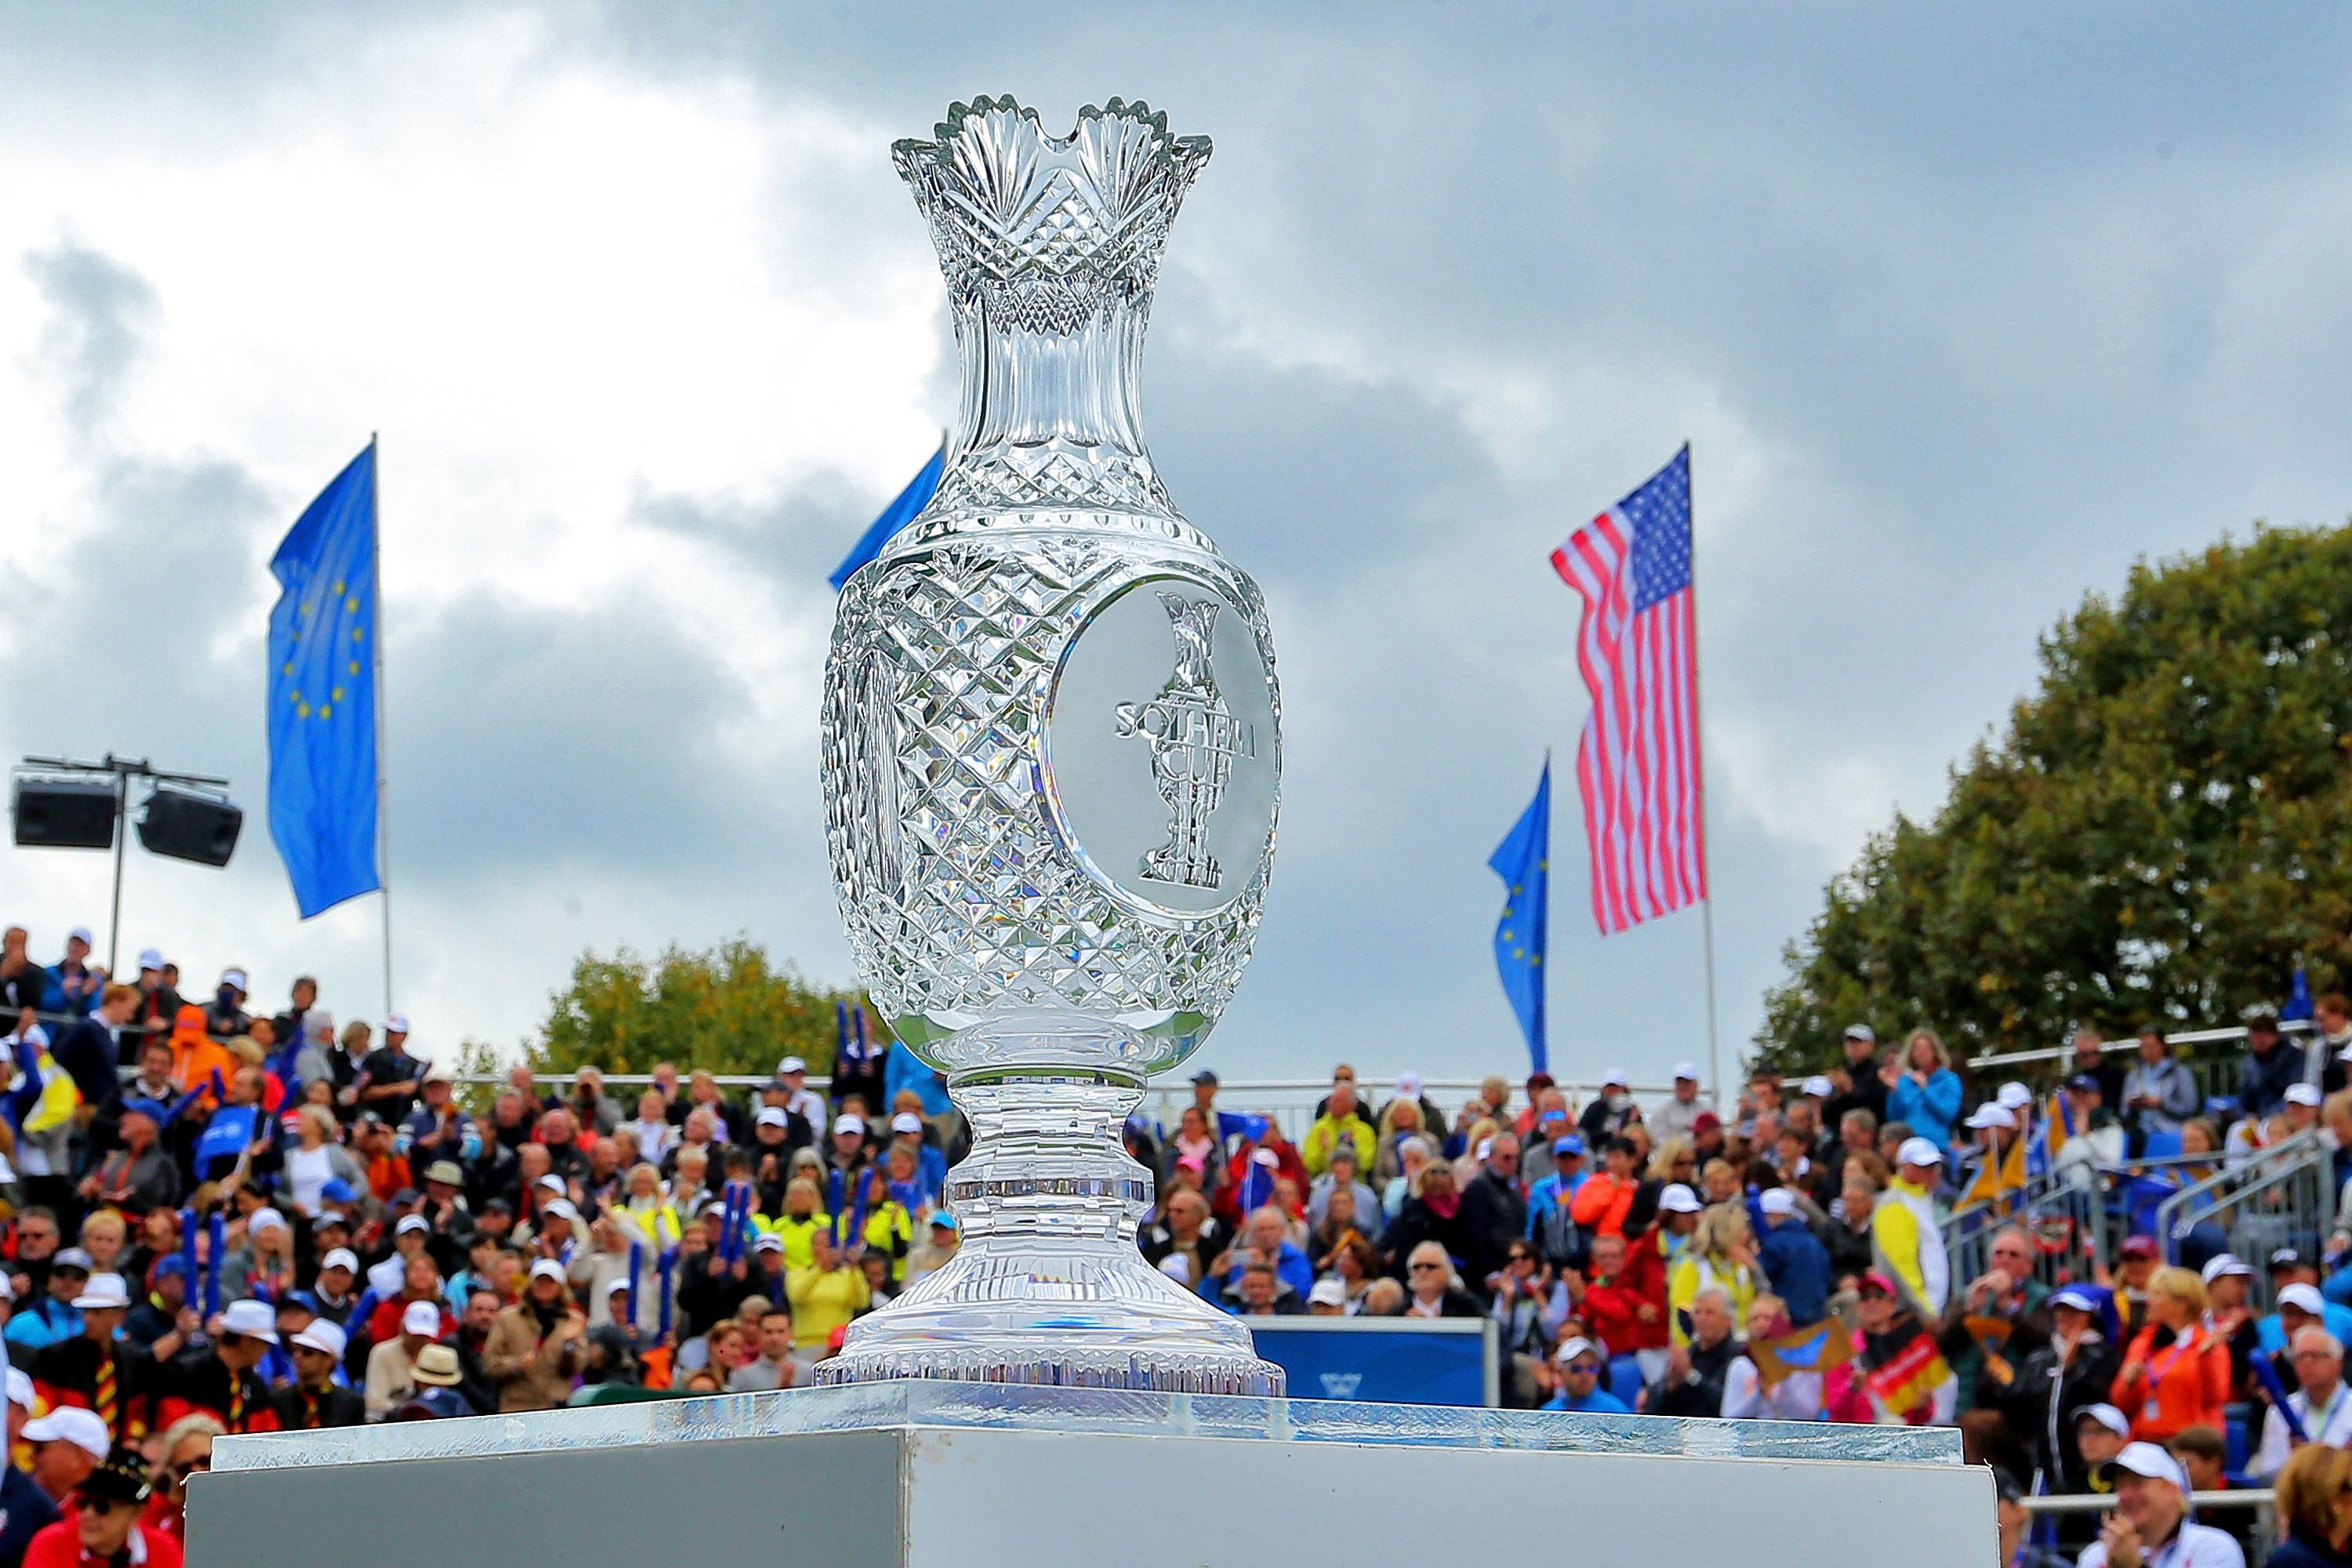 Solheim Cup With A 105 USA Edge, Where's The Rivalry? Dog Leg News